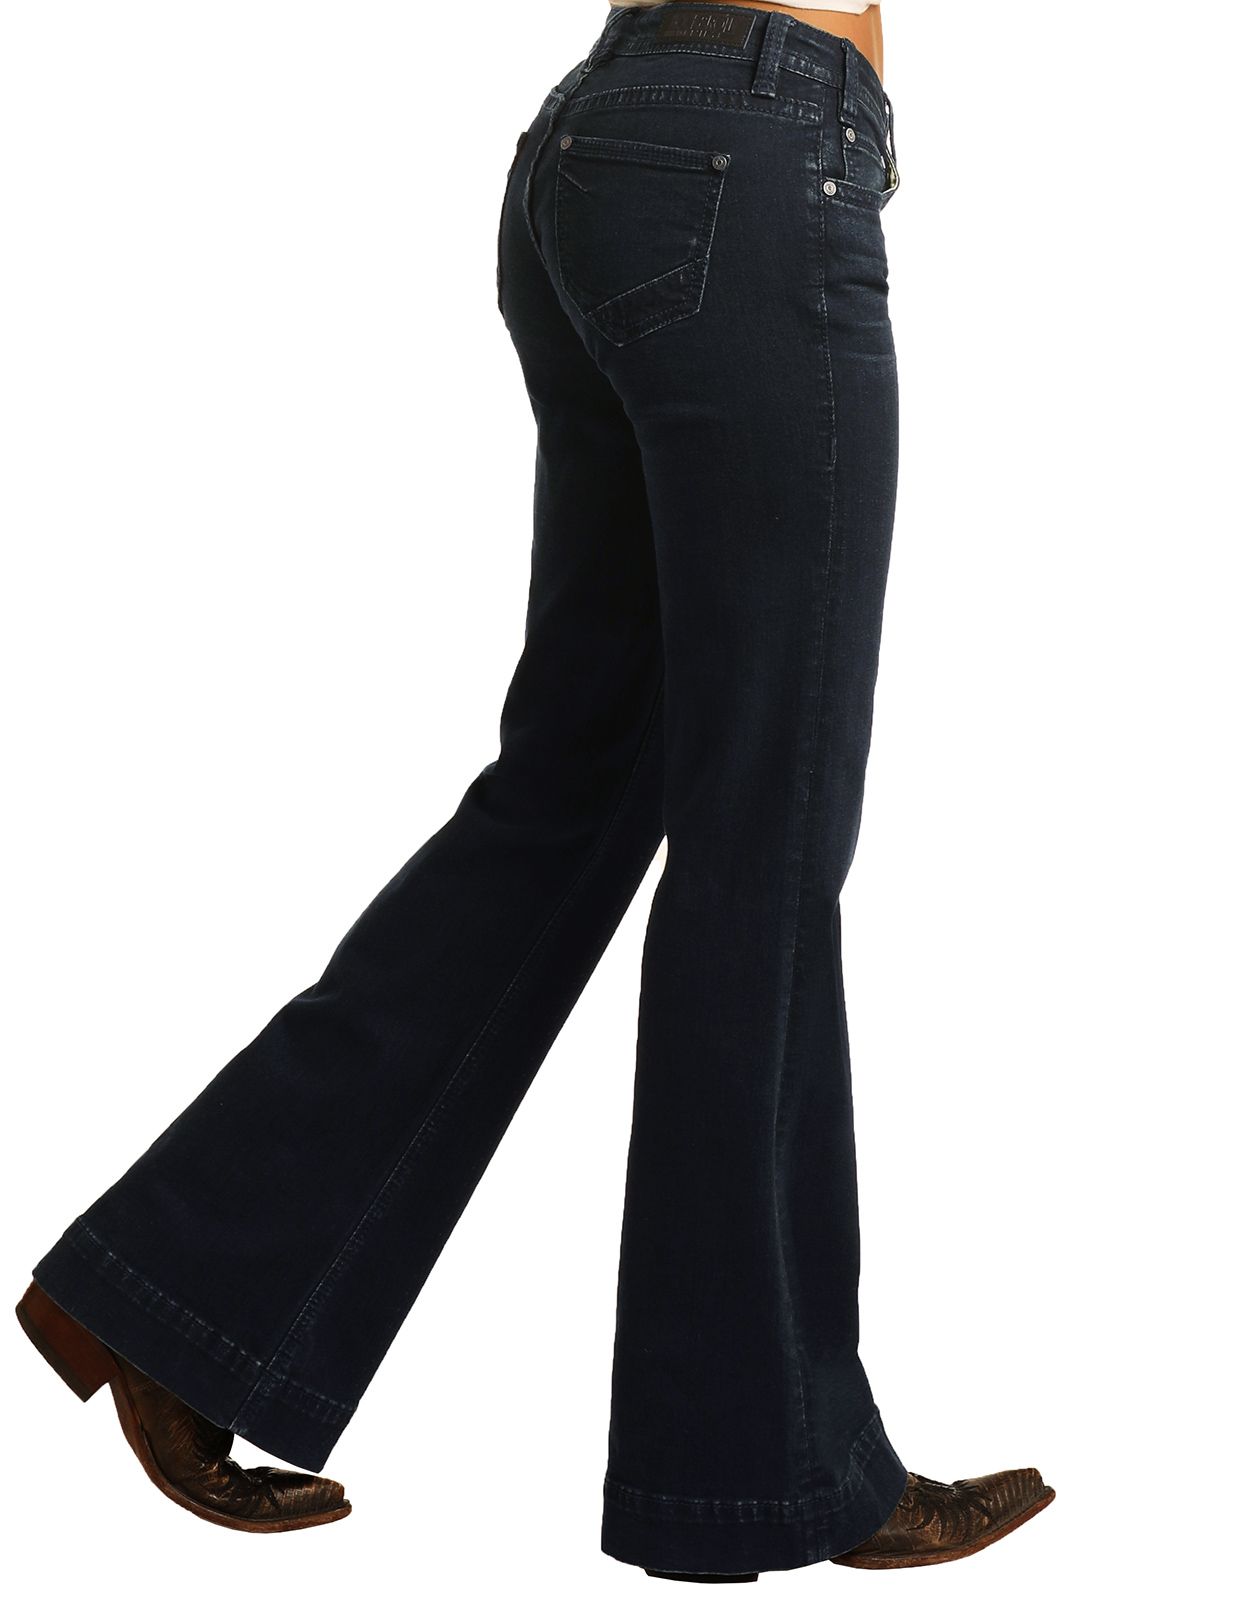 Women's High Rise Extra Stretch Bell Bottom Jeans - Black